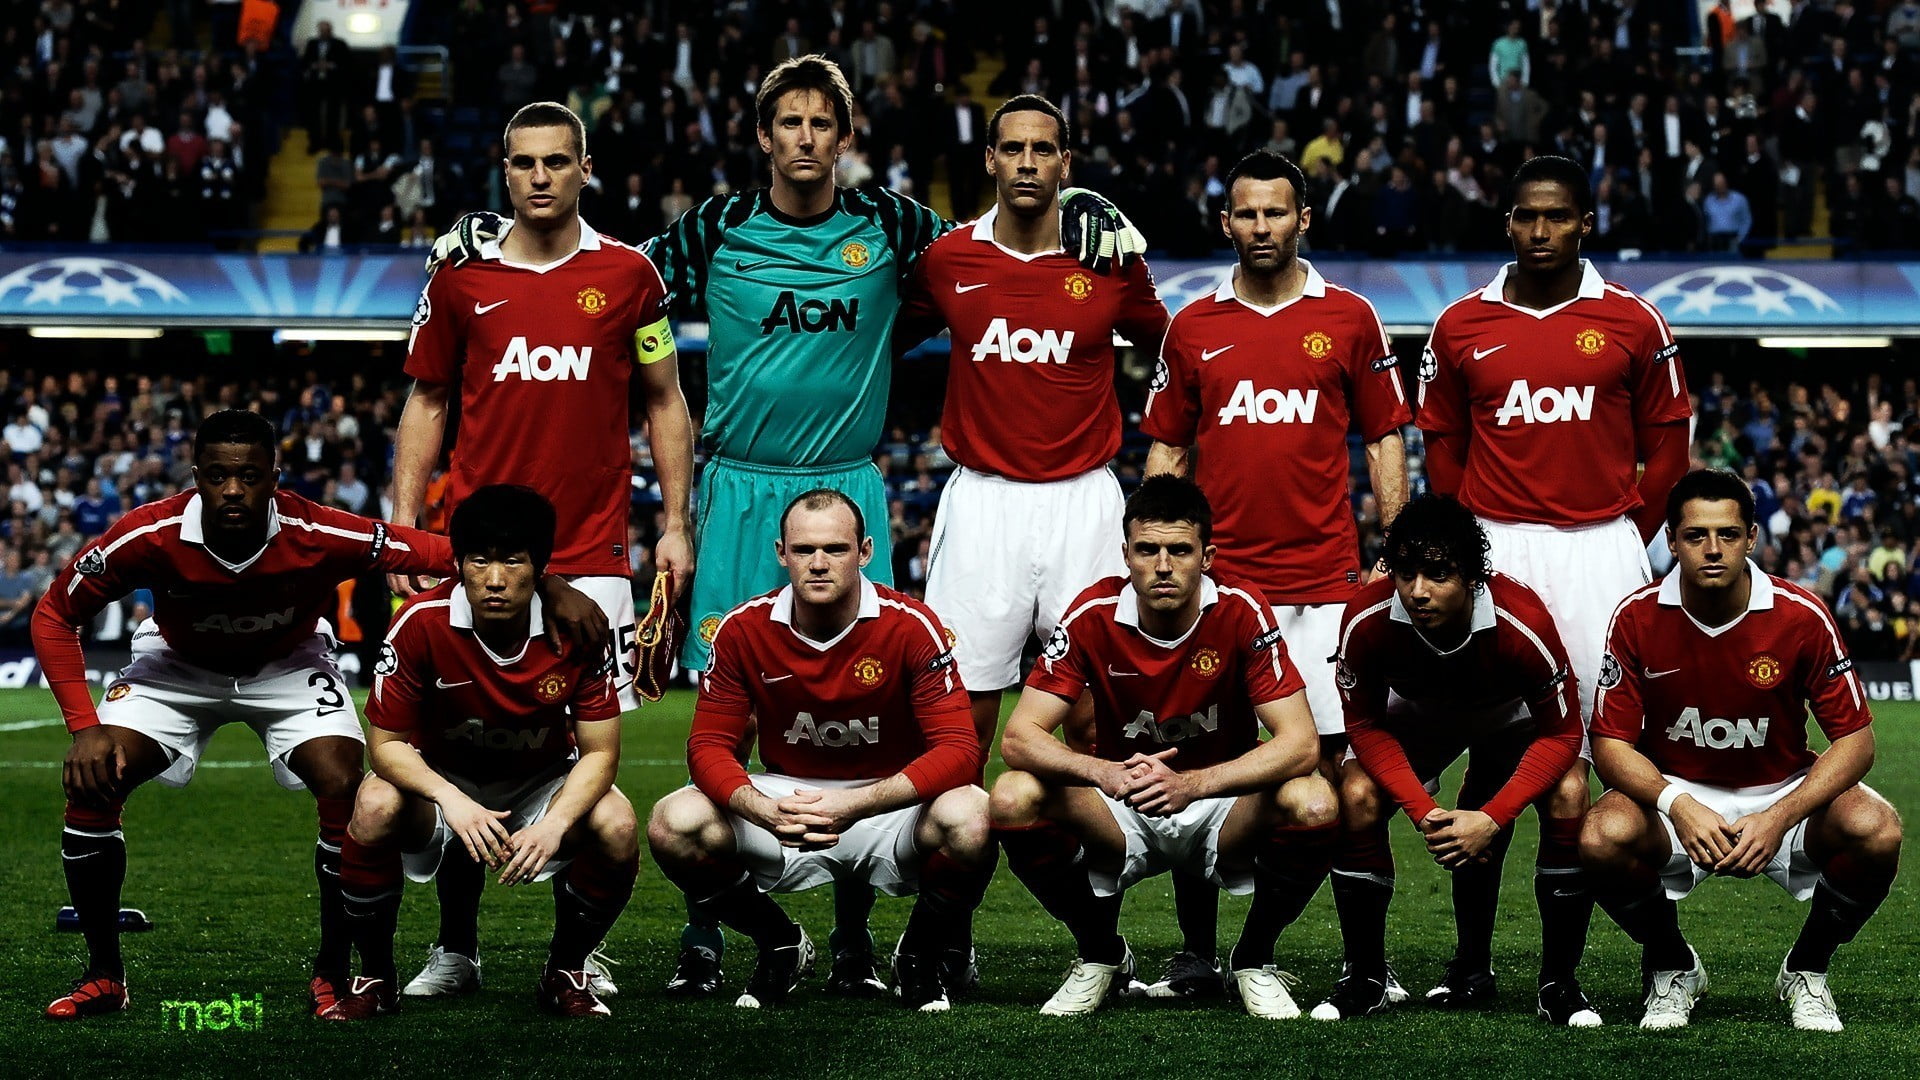 Aon soccer players wallpaper, Manchester United , sport, group of people